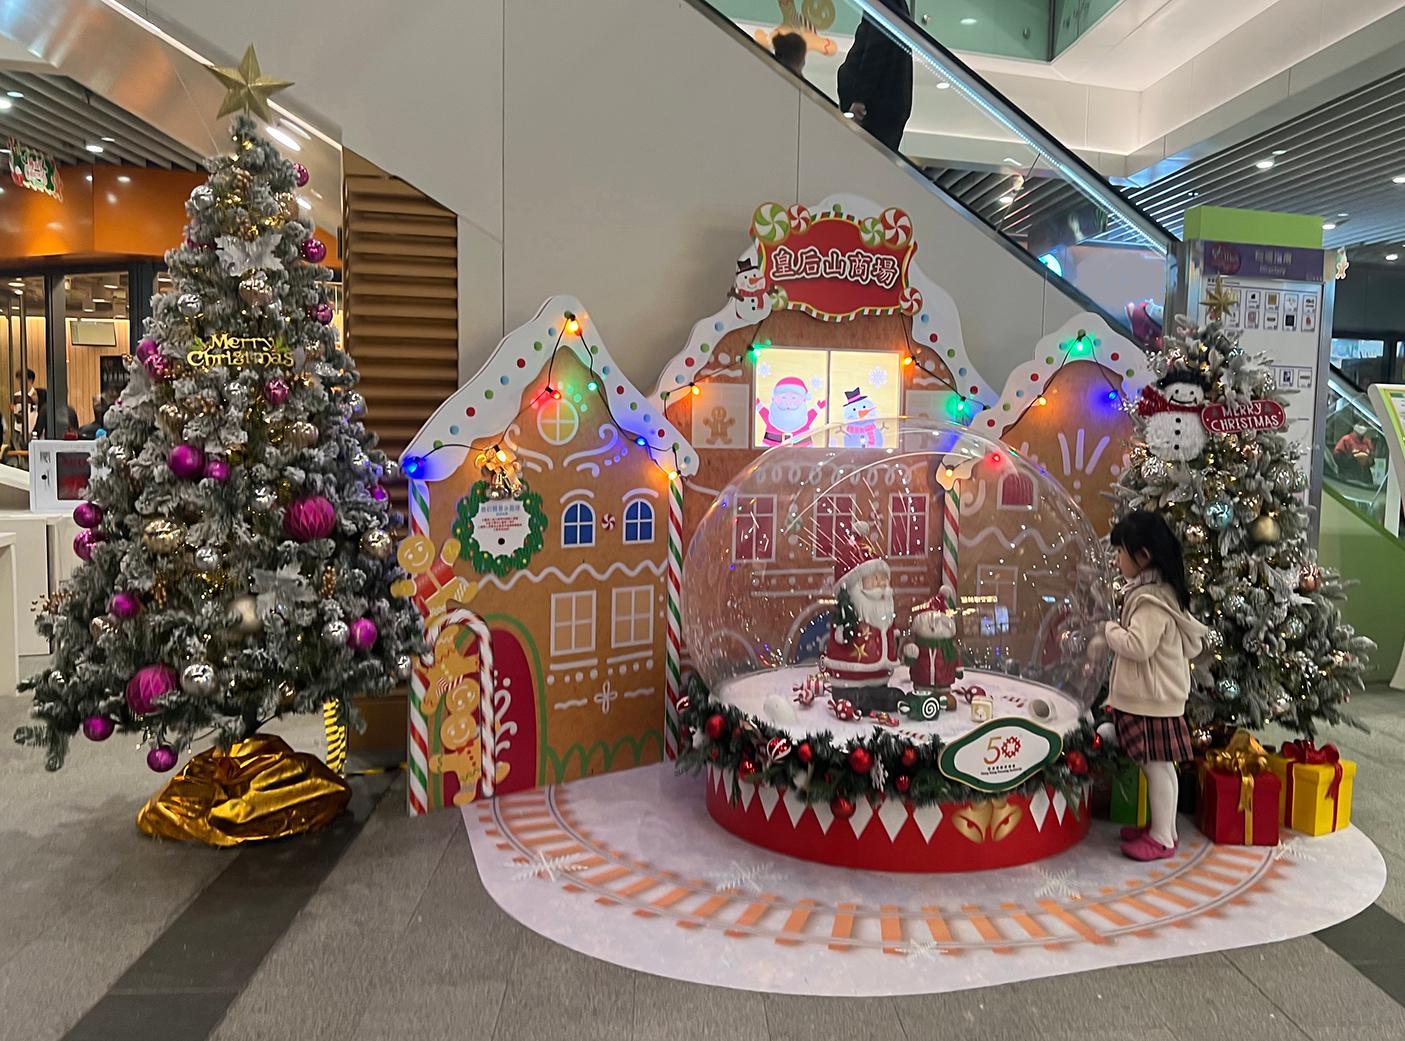 The Hong Kong Housing Authority (HA) is launching Christmas promotions and night vibe activities at its shopping centres to share the holiday season's joy with the public. Photo shows Christmas decorations at the HA's Queens Hill Shopping Centre in Fanling.